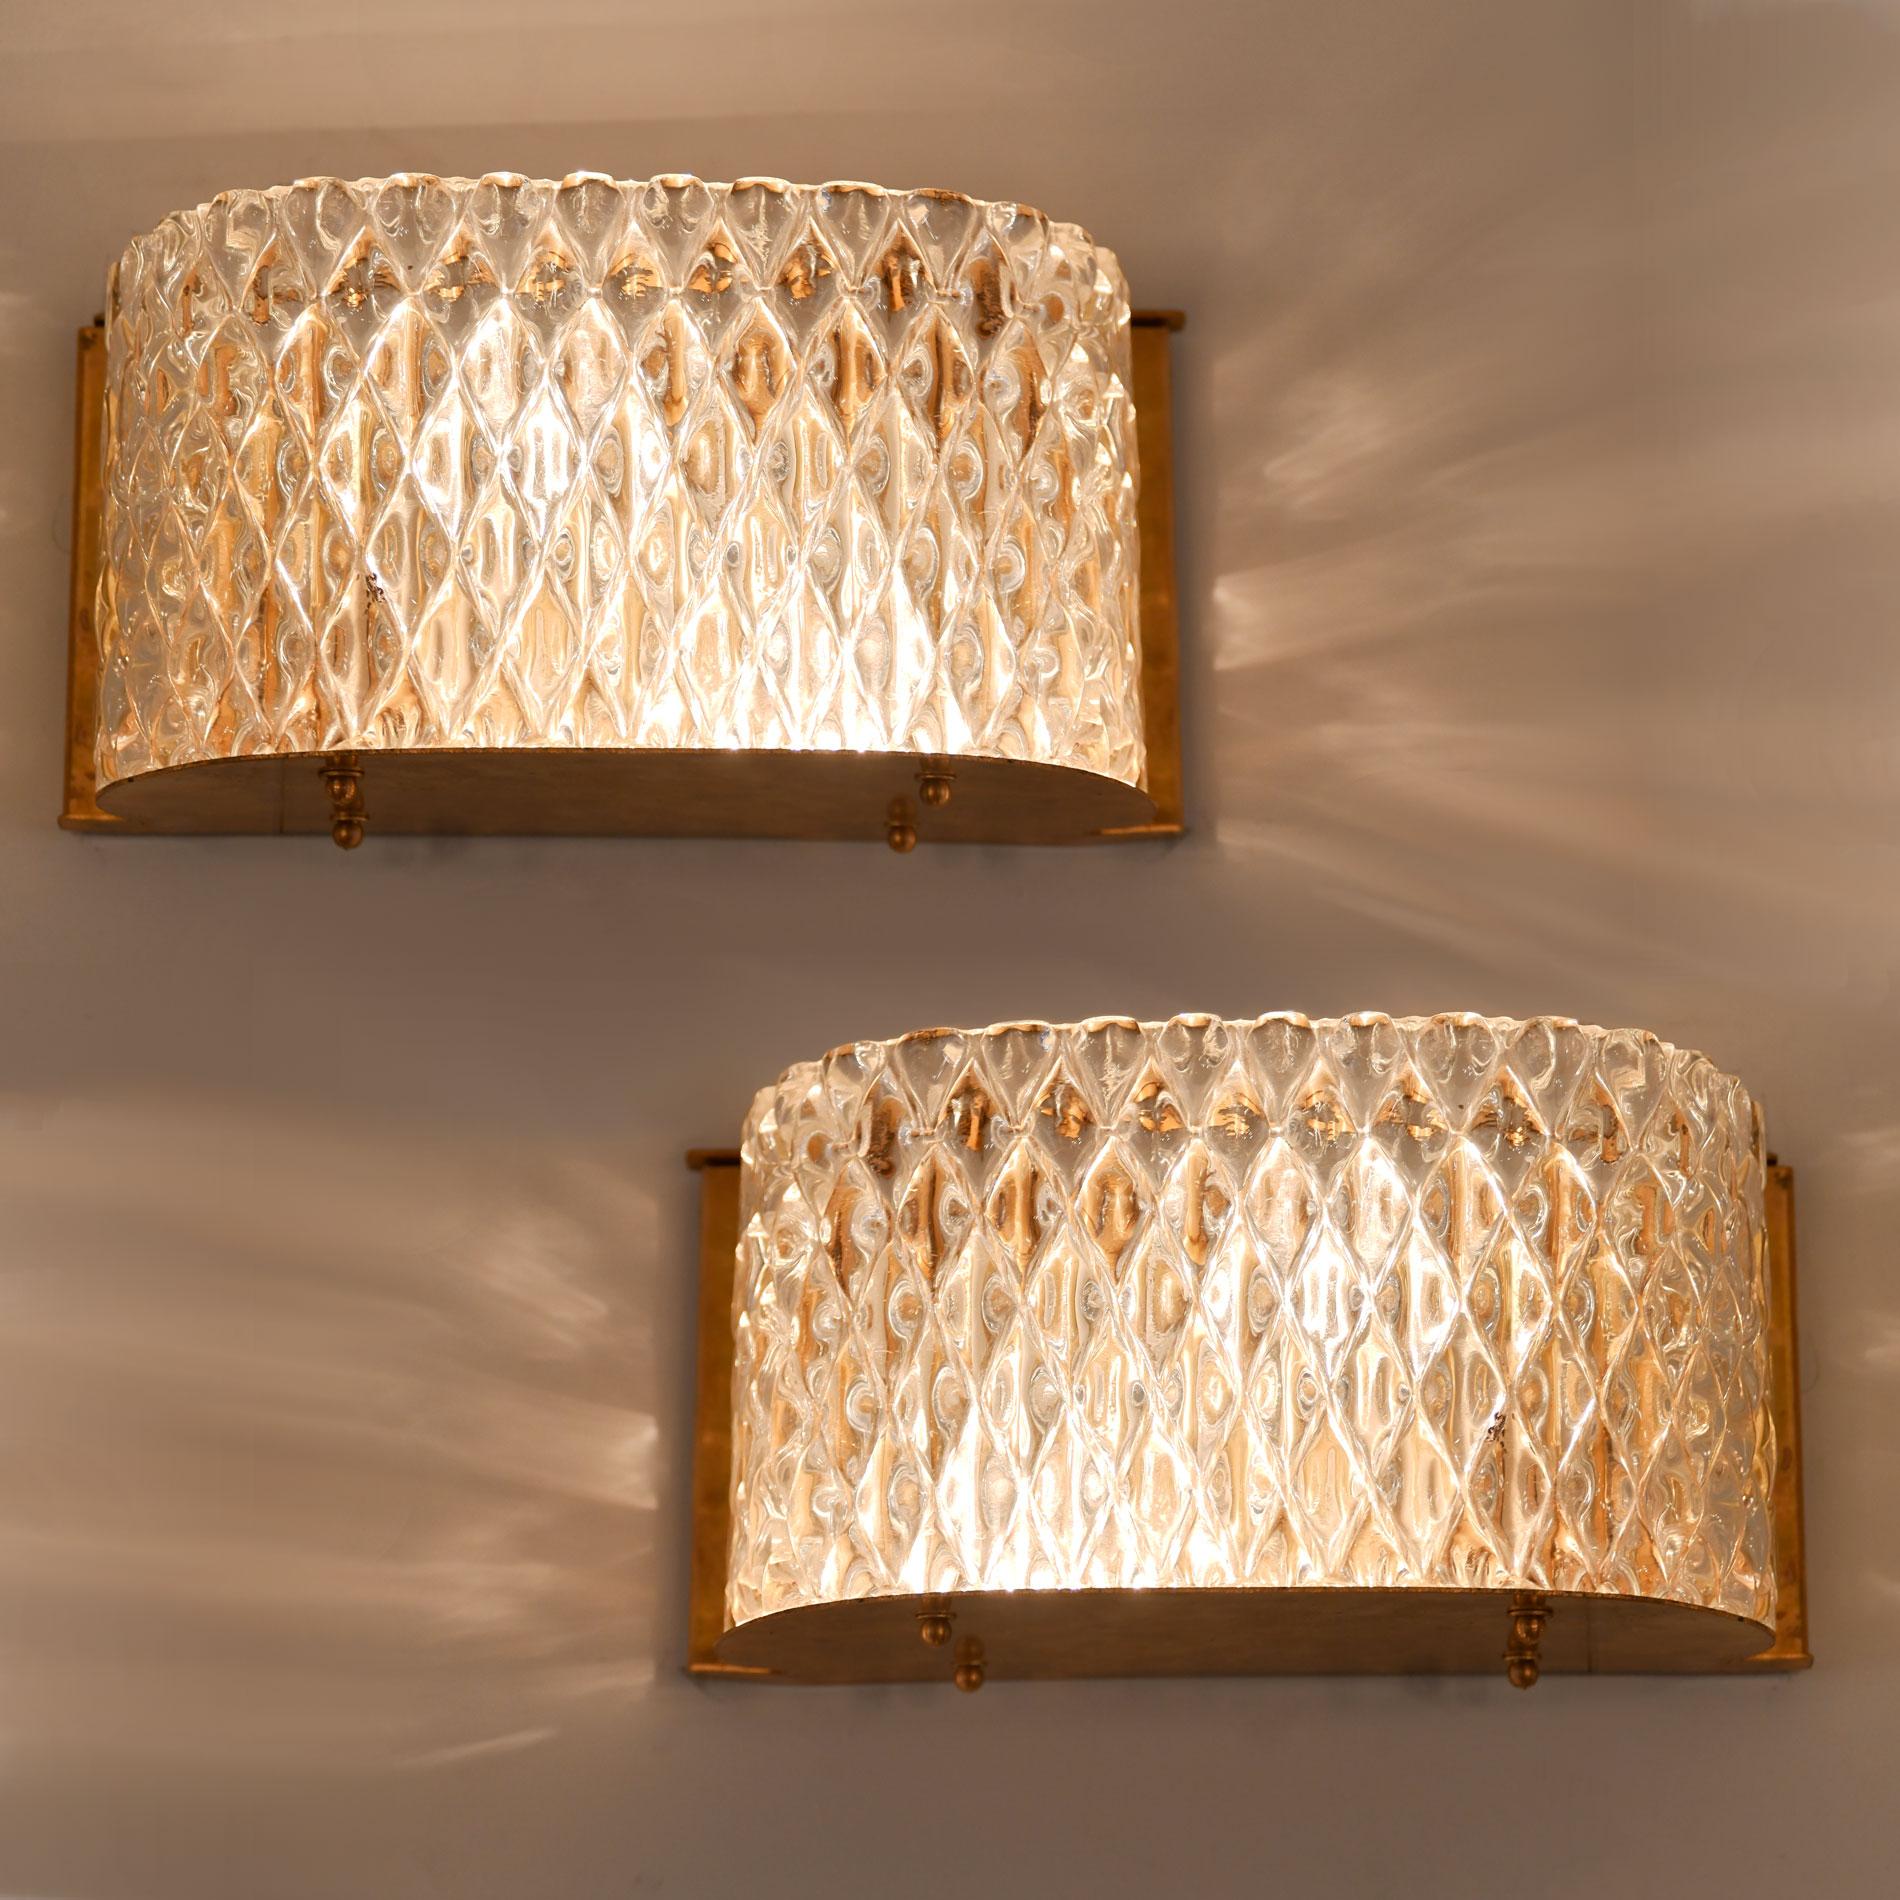 Glamorous criss-cross textured glass wall light with curved corners. The overall effect of the glass alongside the reflection of the brass back plate and base creates a lovely diffused warm light.